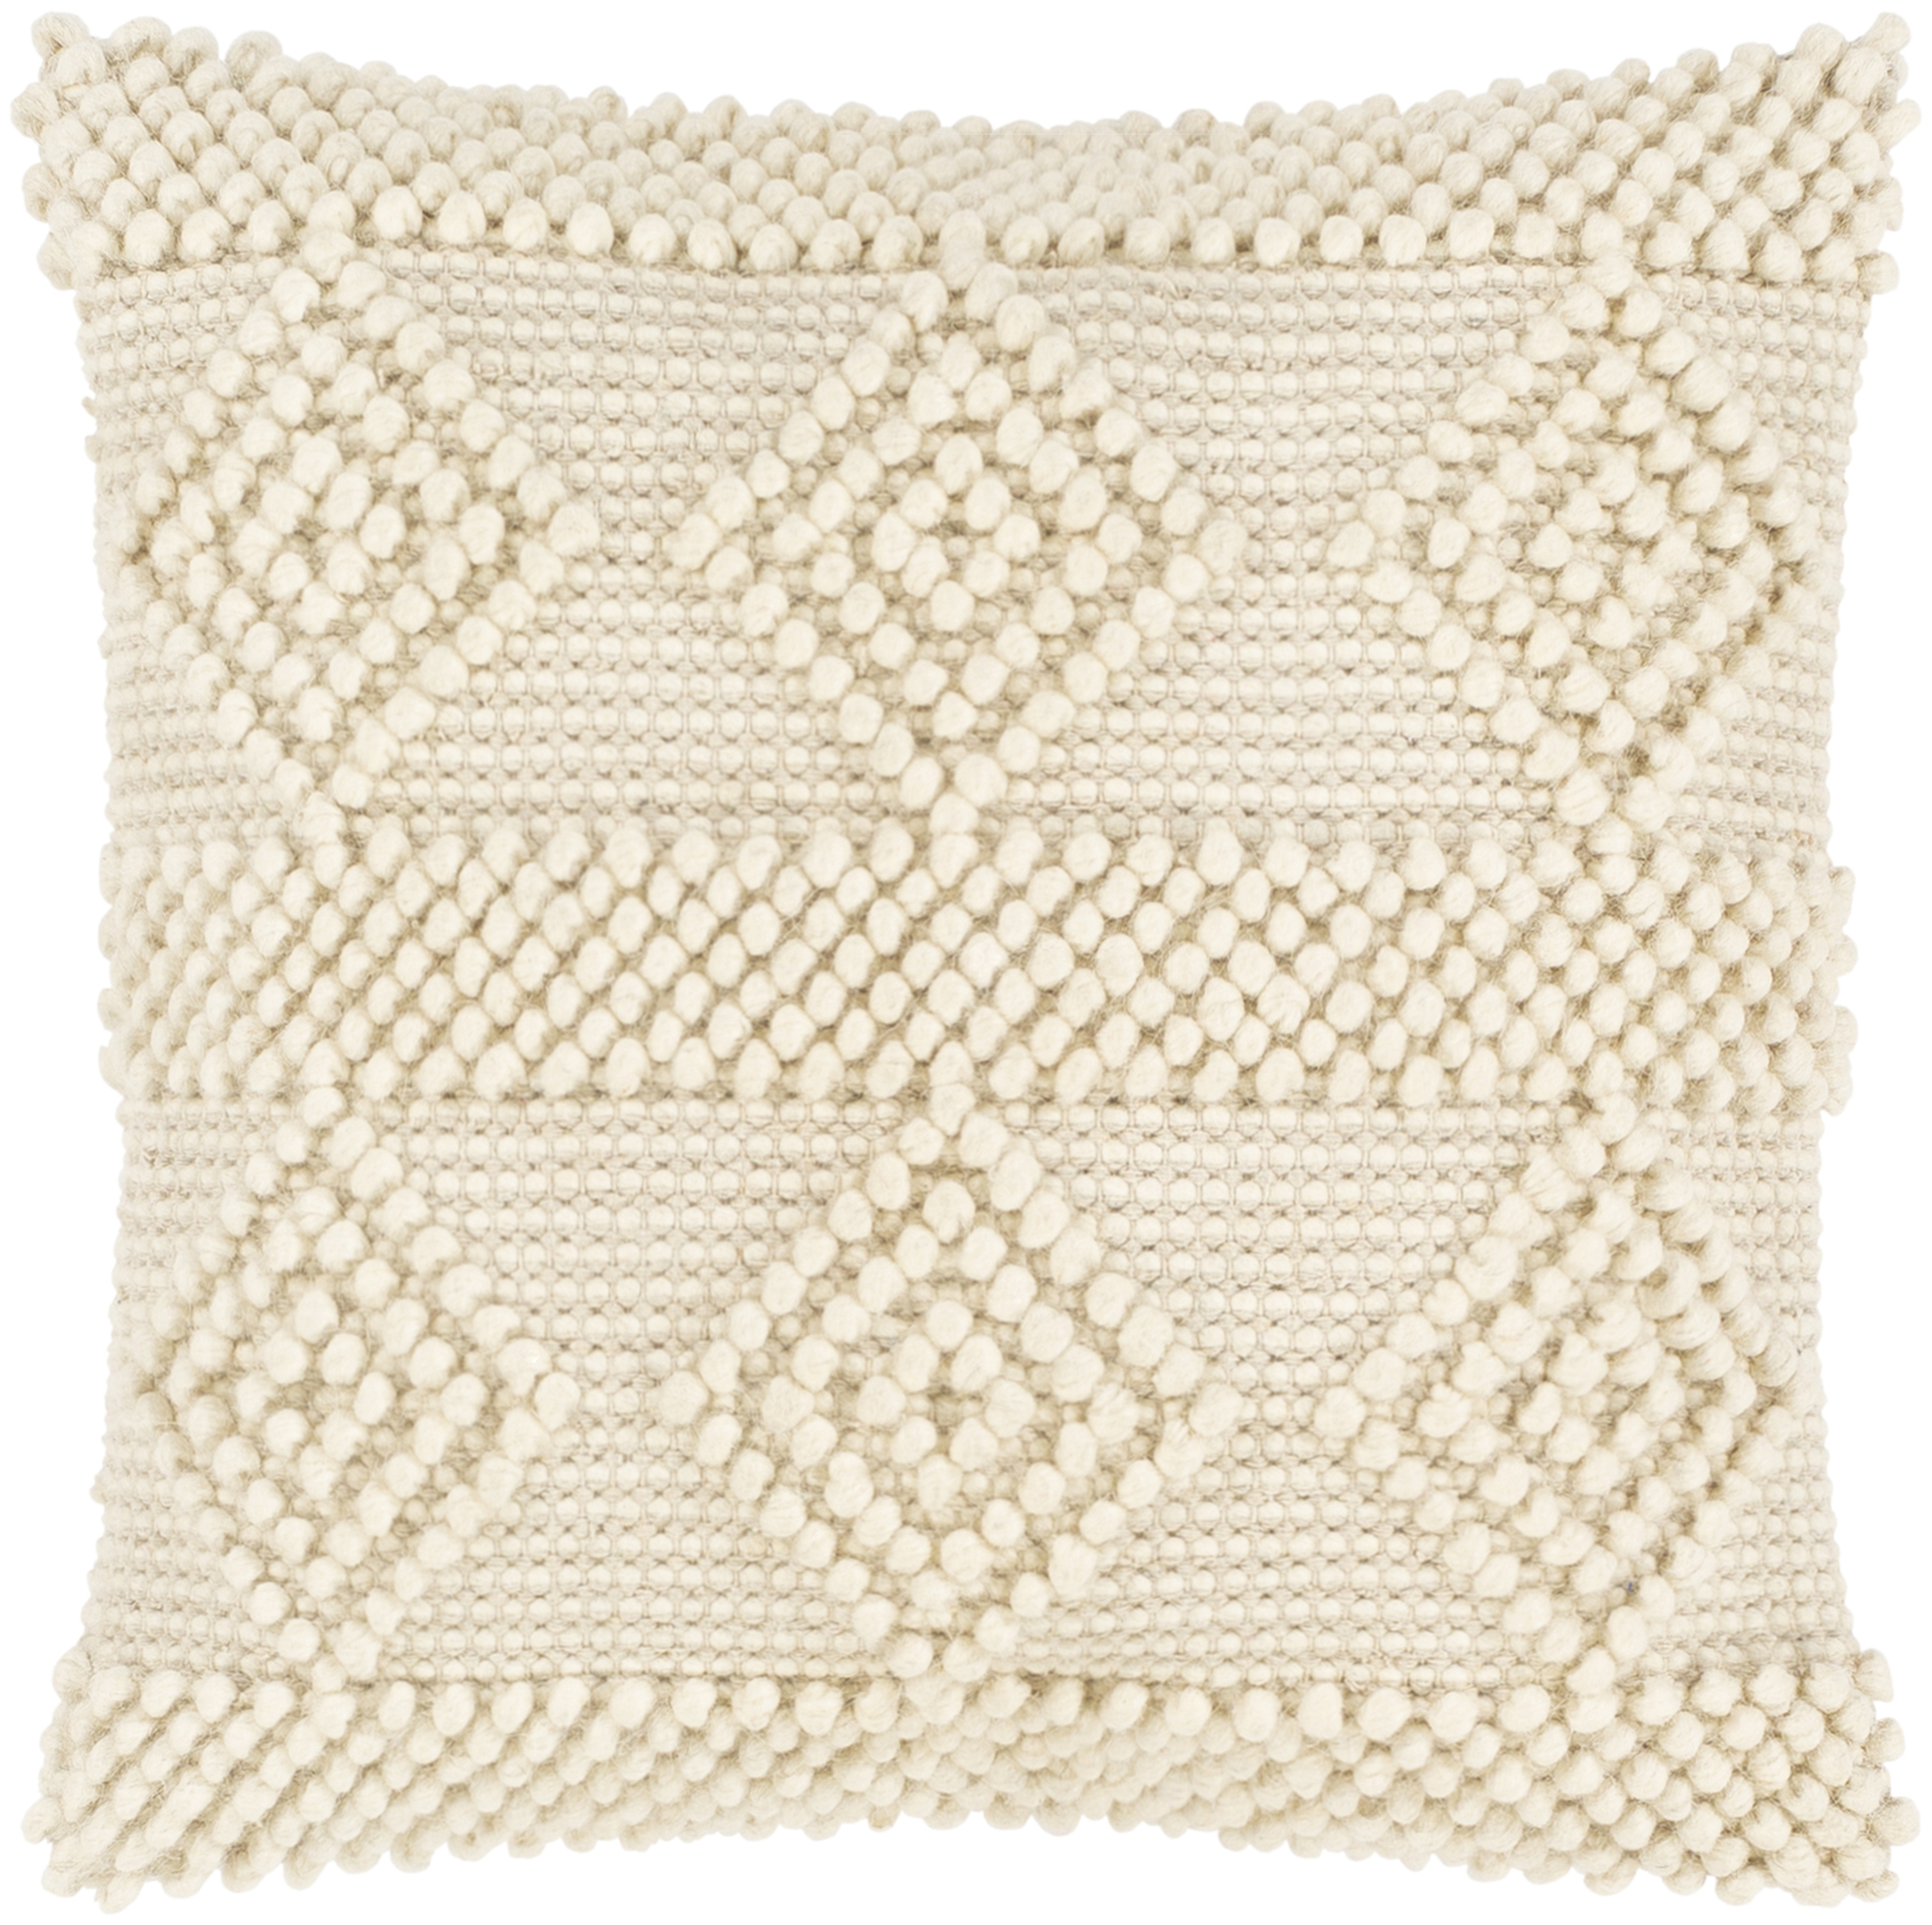 Hygge Throw Pillow, 20" x 20", with poly insert - Surya